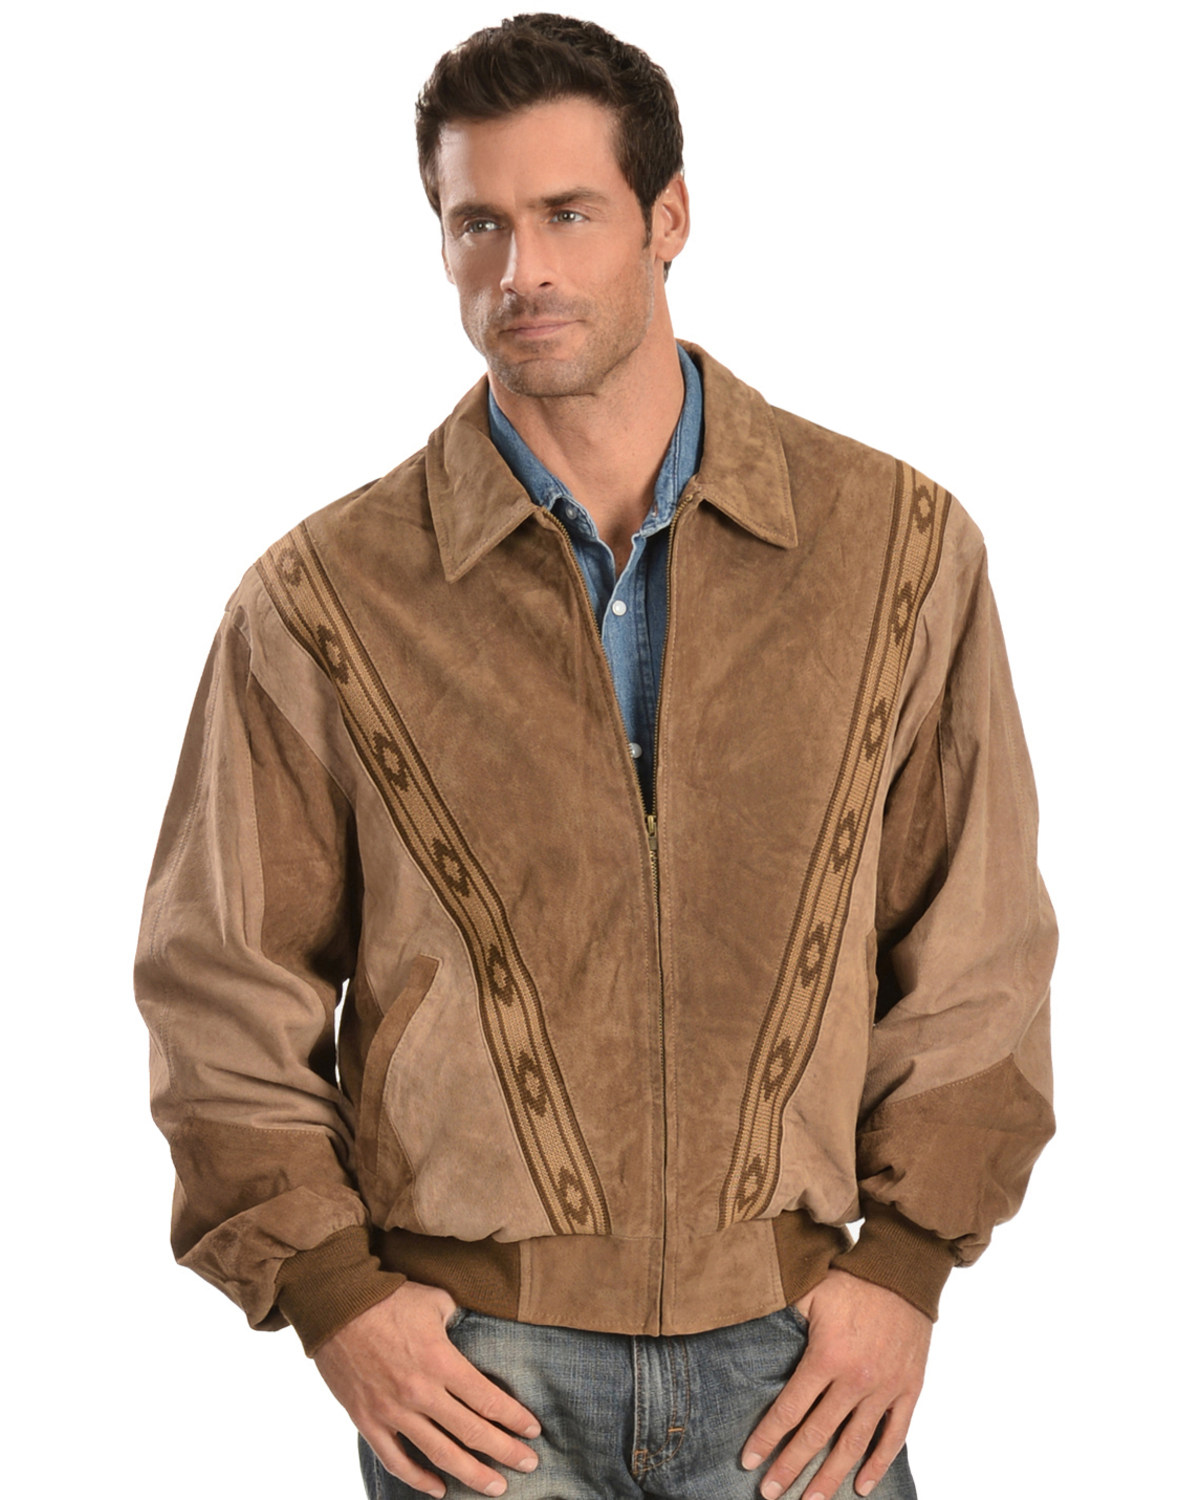 Scully Boar Suede Leather Arena Jacket